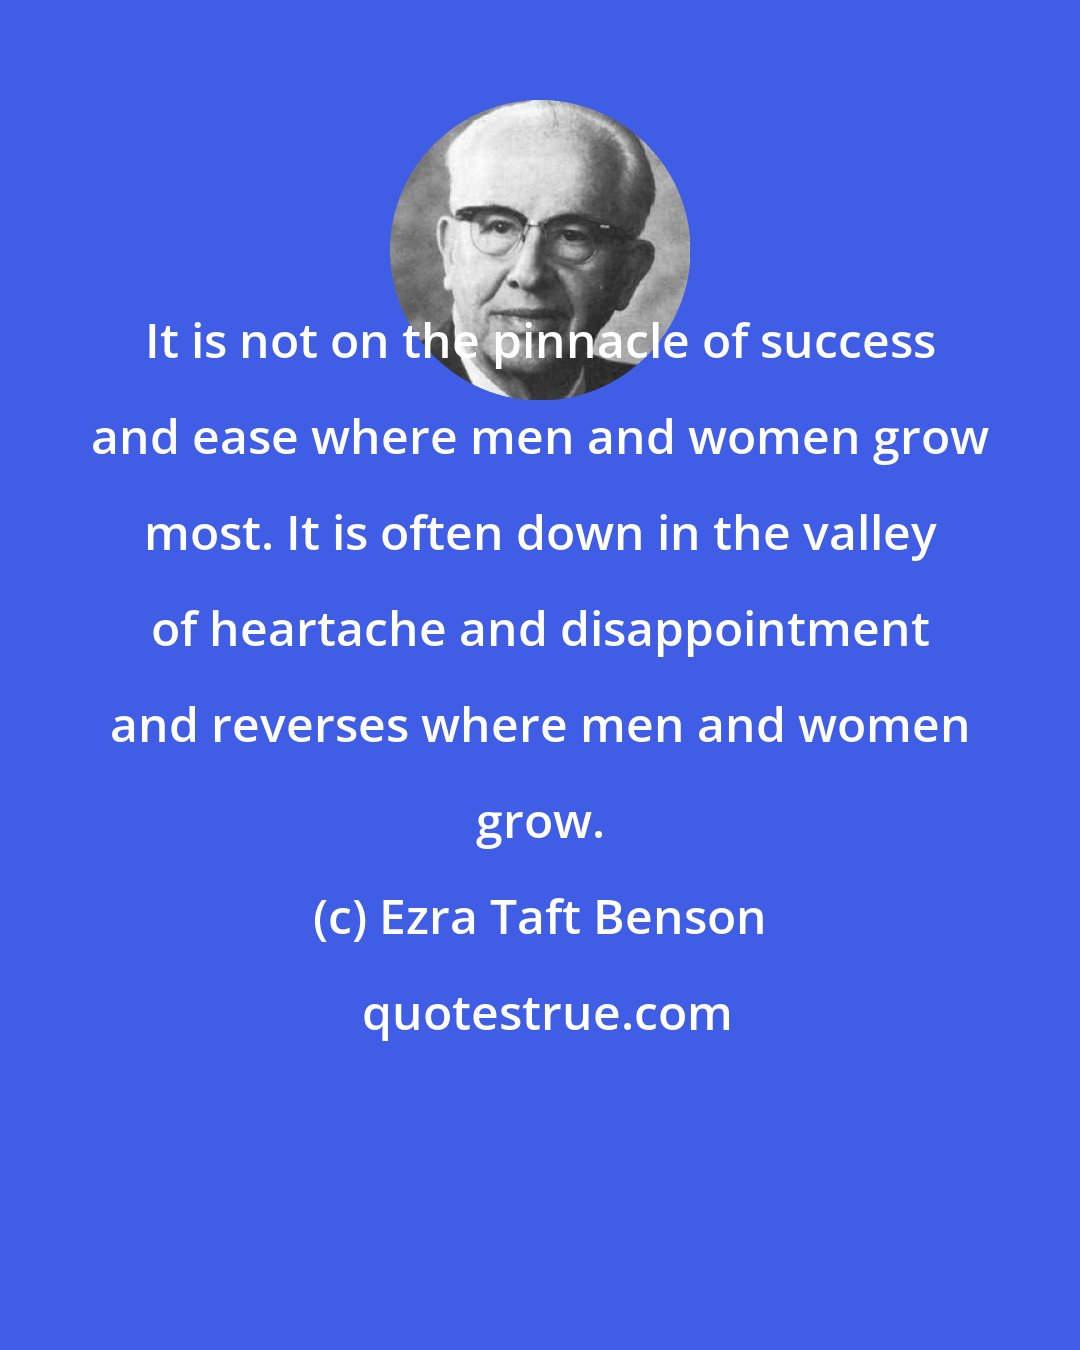 Ezra Taft Benson: It is not on the pinnacle of success and ease where men and women grow most. It is often down in the valley of heartache and disappointment and reverses where men and women grow.